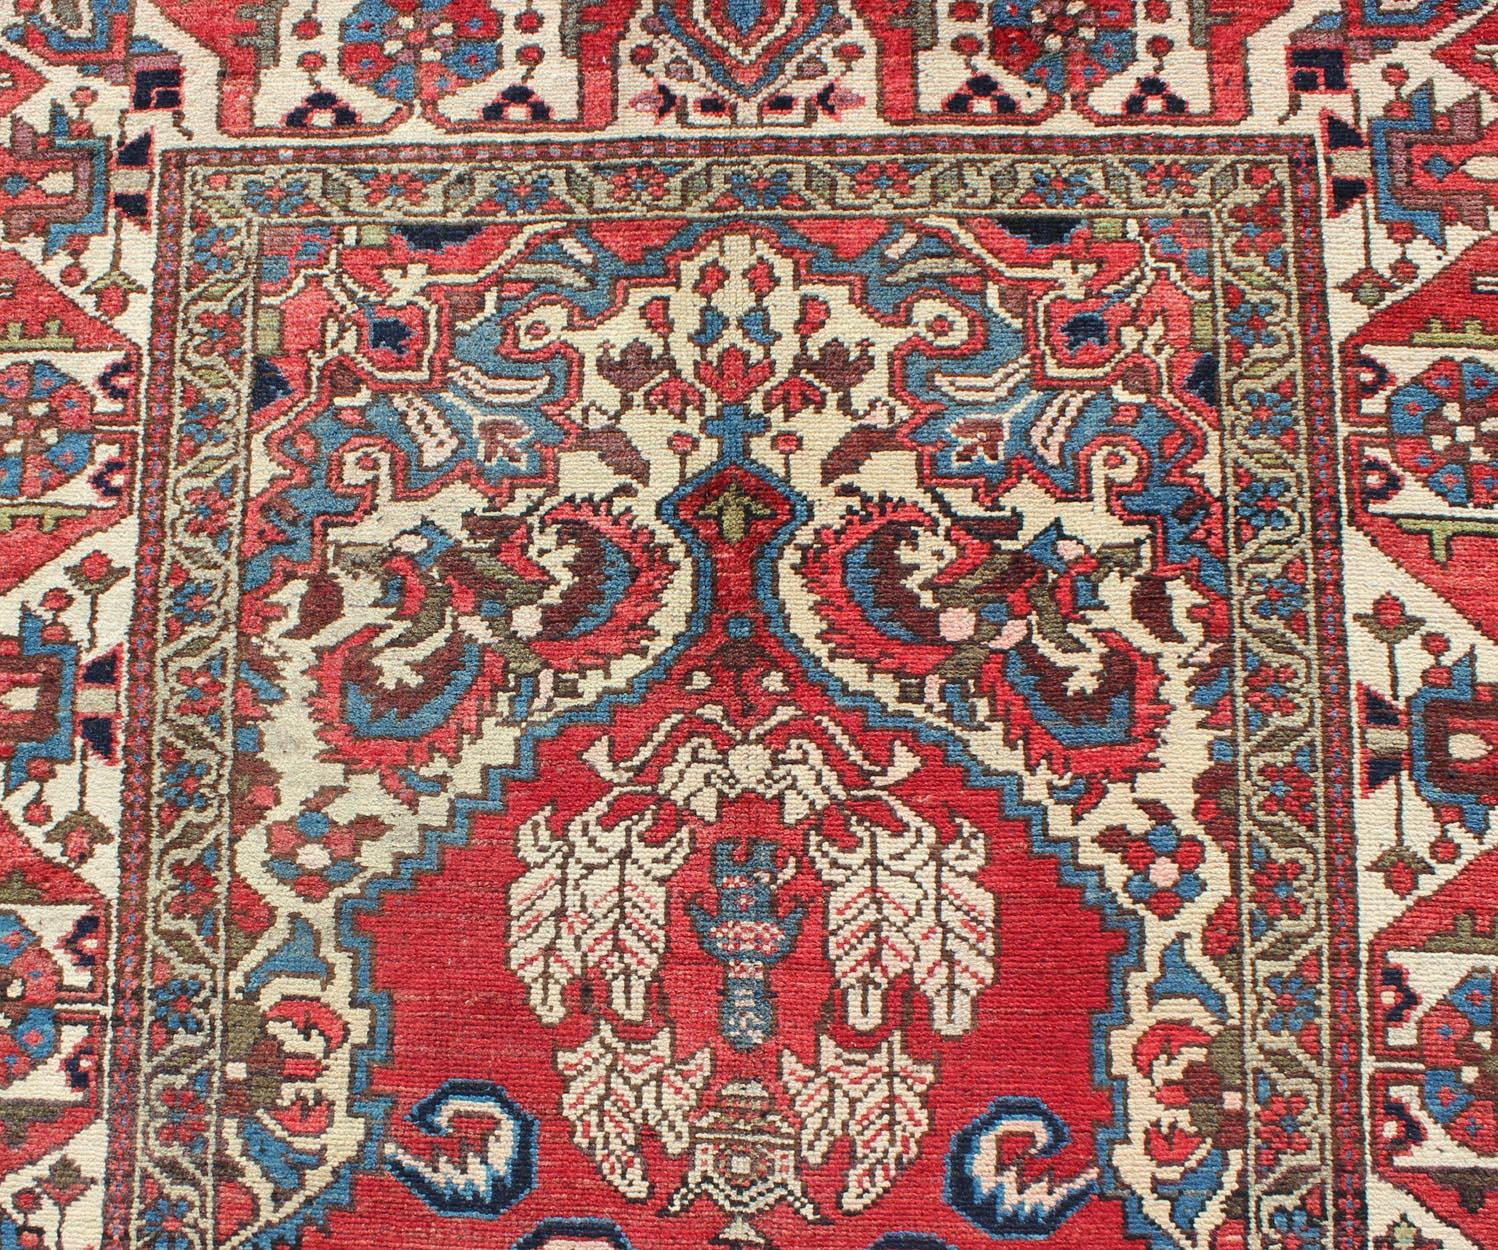 Vintage Persian Bakhtiari Rug with Ornate Central Medallion and Rich Red Blue For Sale 2